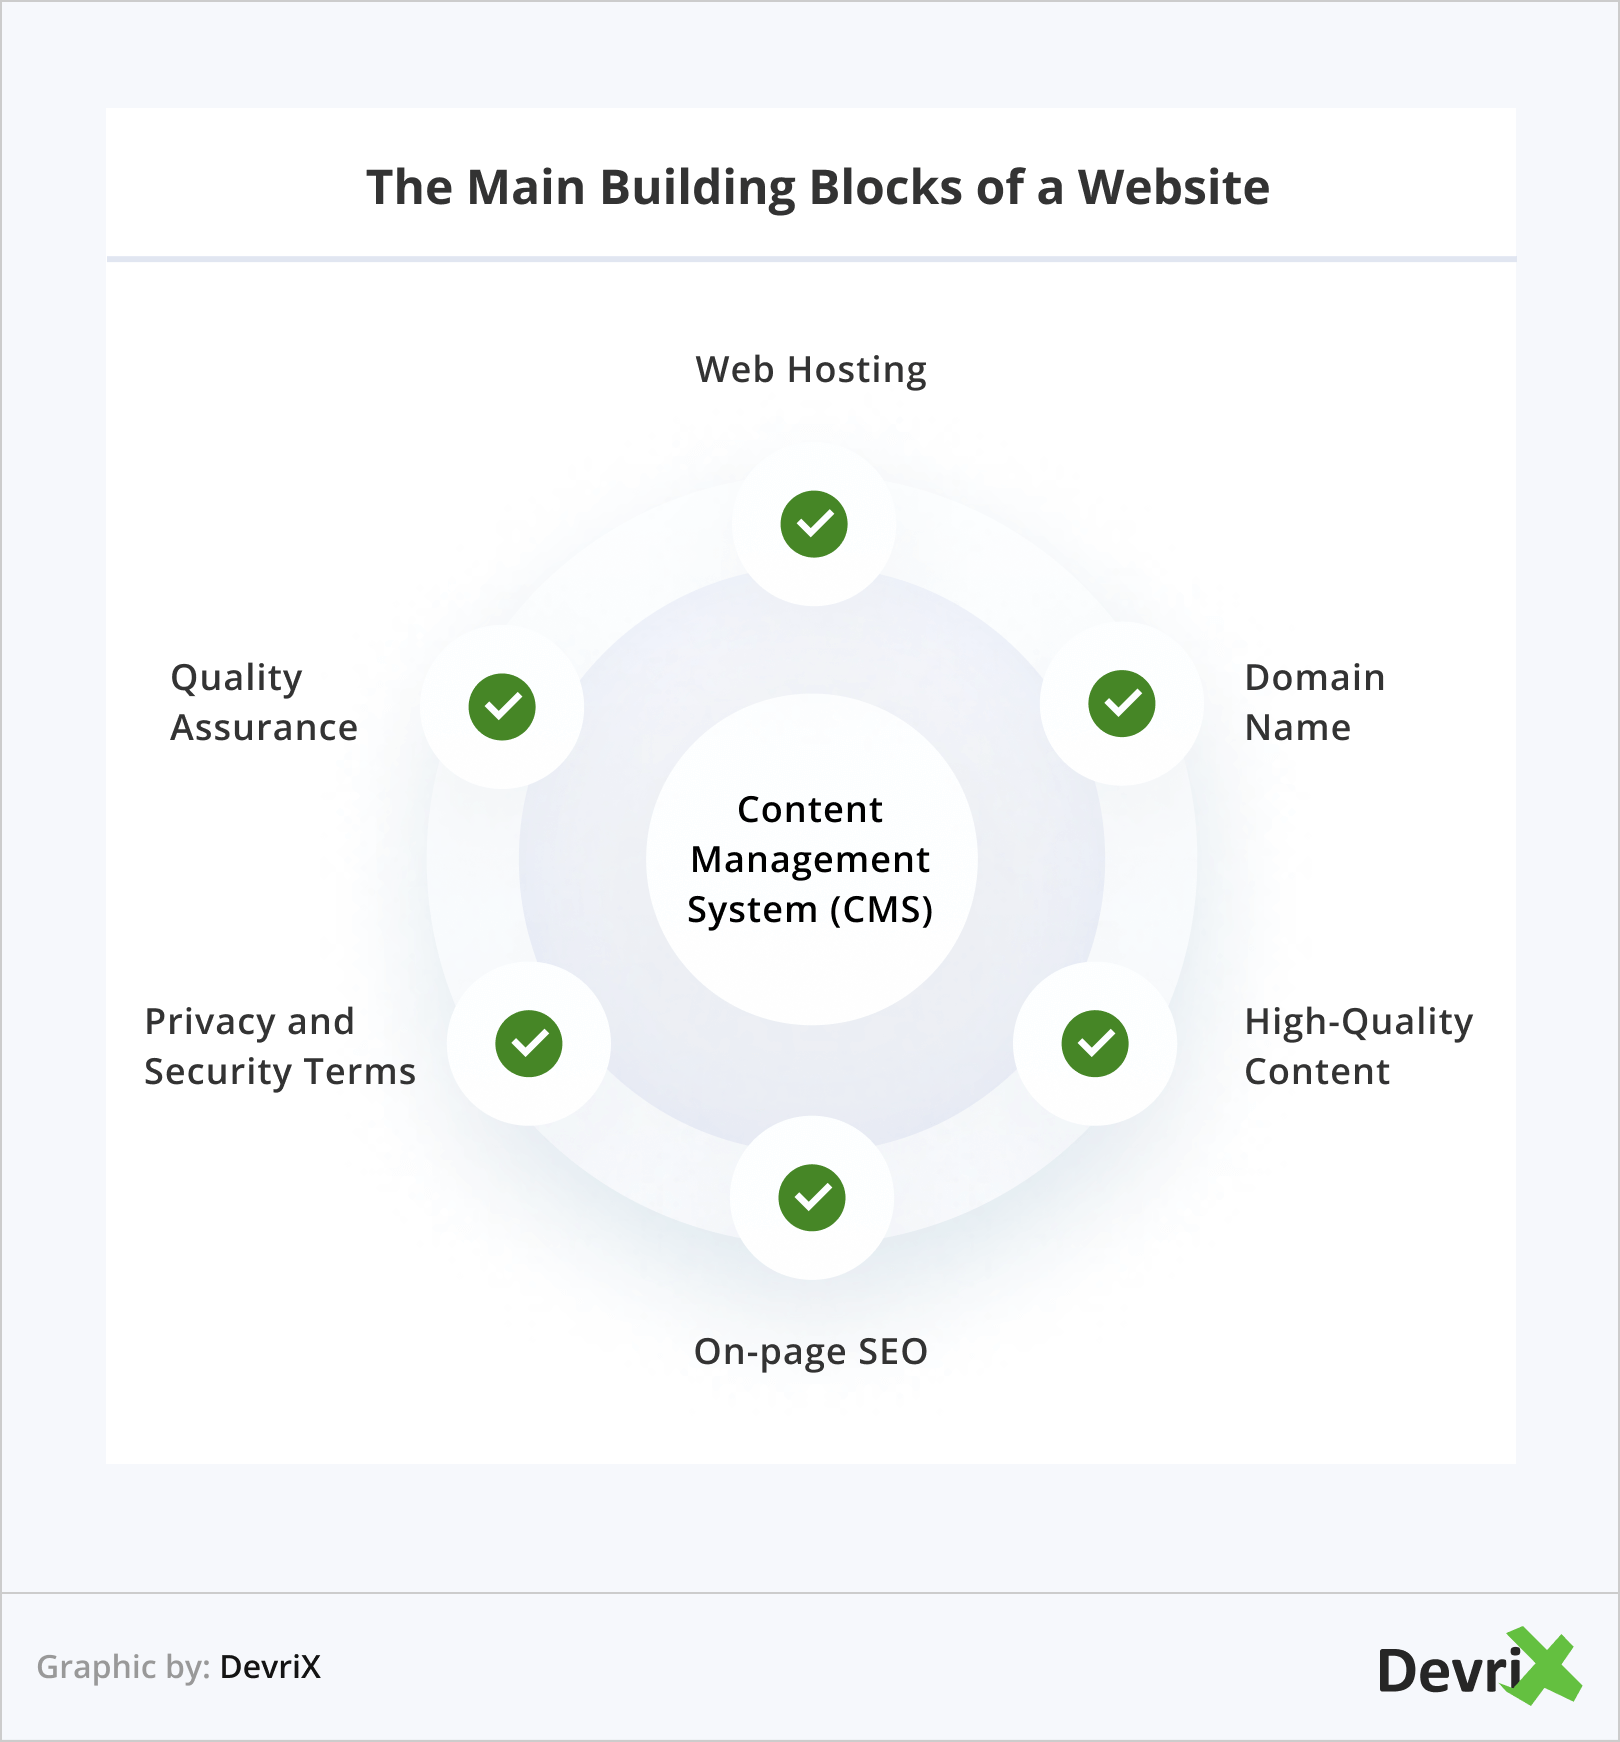  The Main Building Blocks of a Website